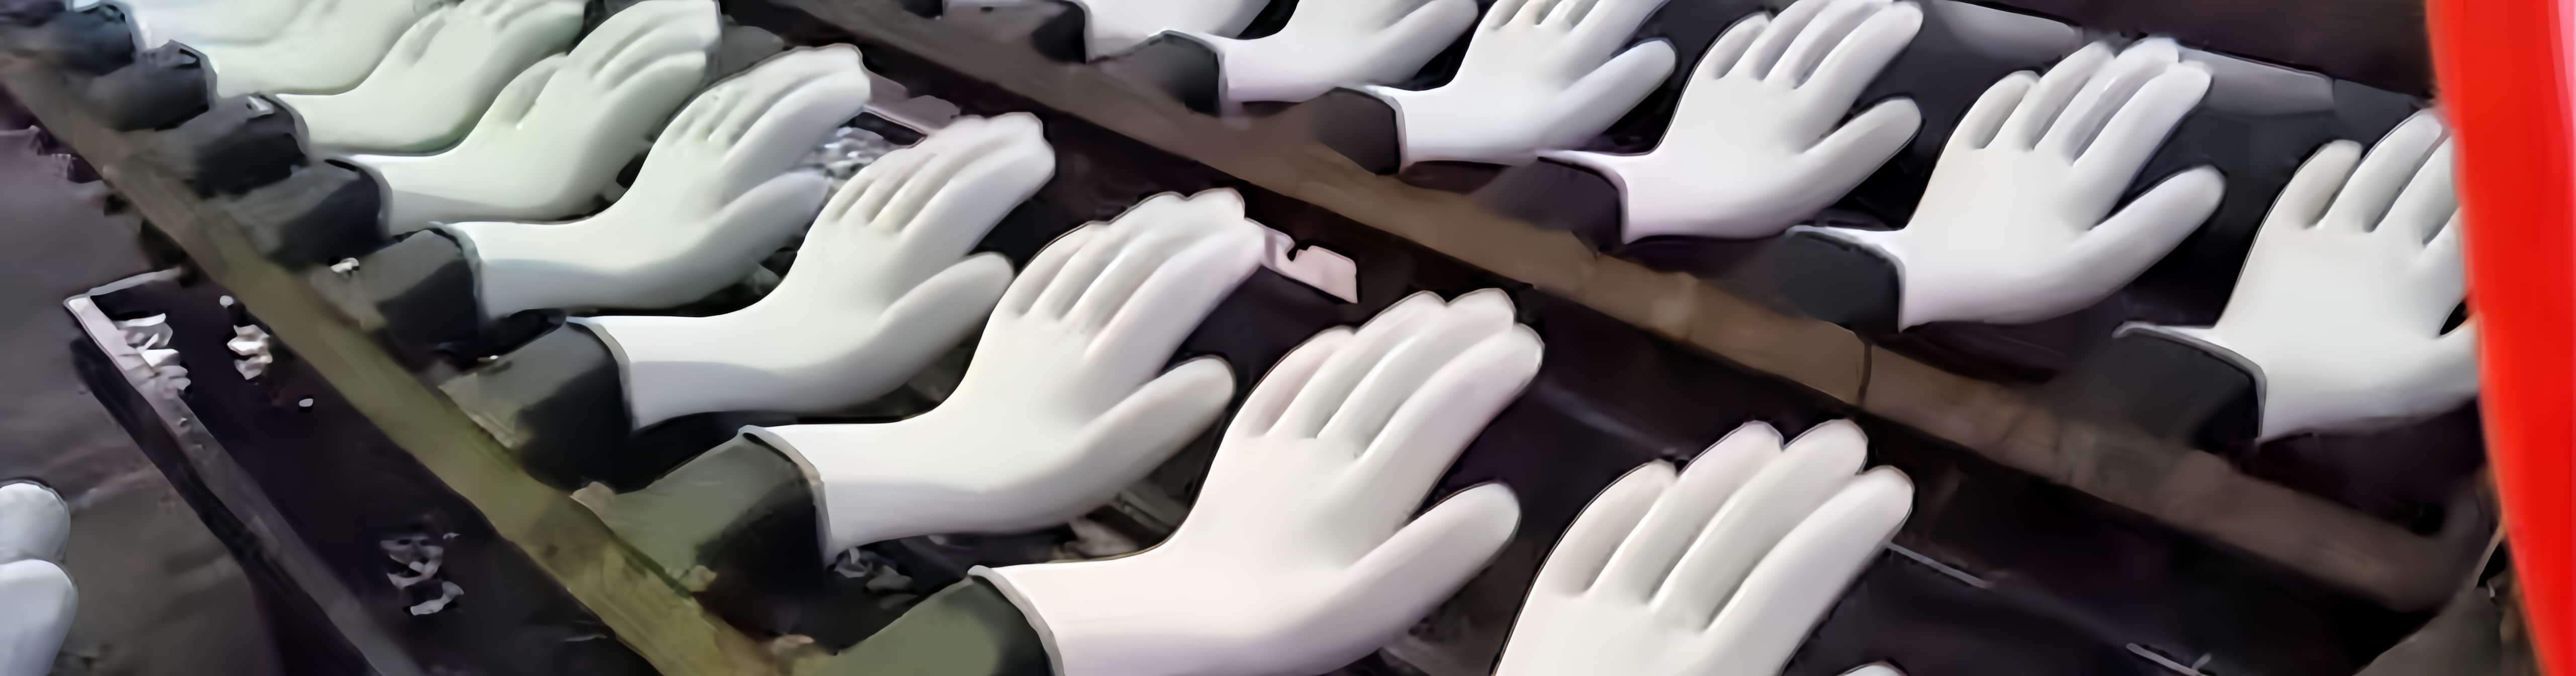 Latex Labor Gloves Production Line